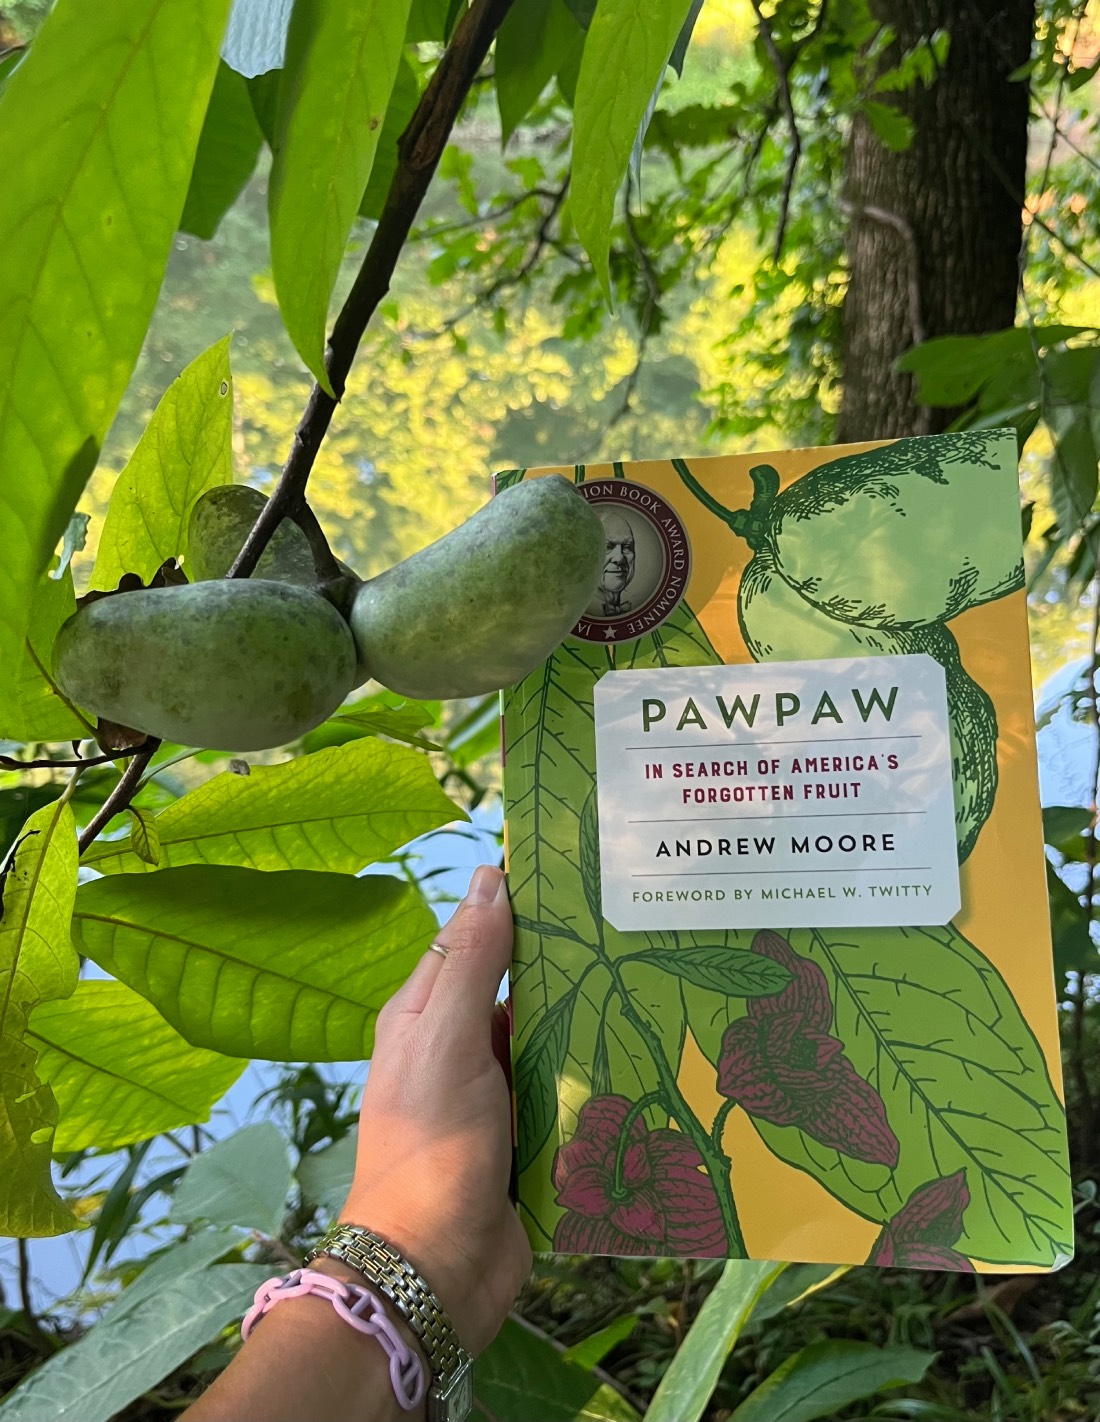 the book held by a cluster of pawpaws